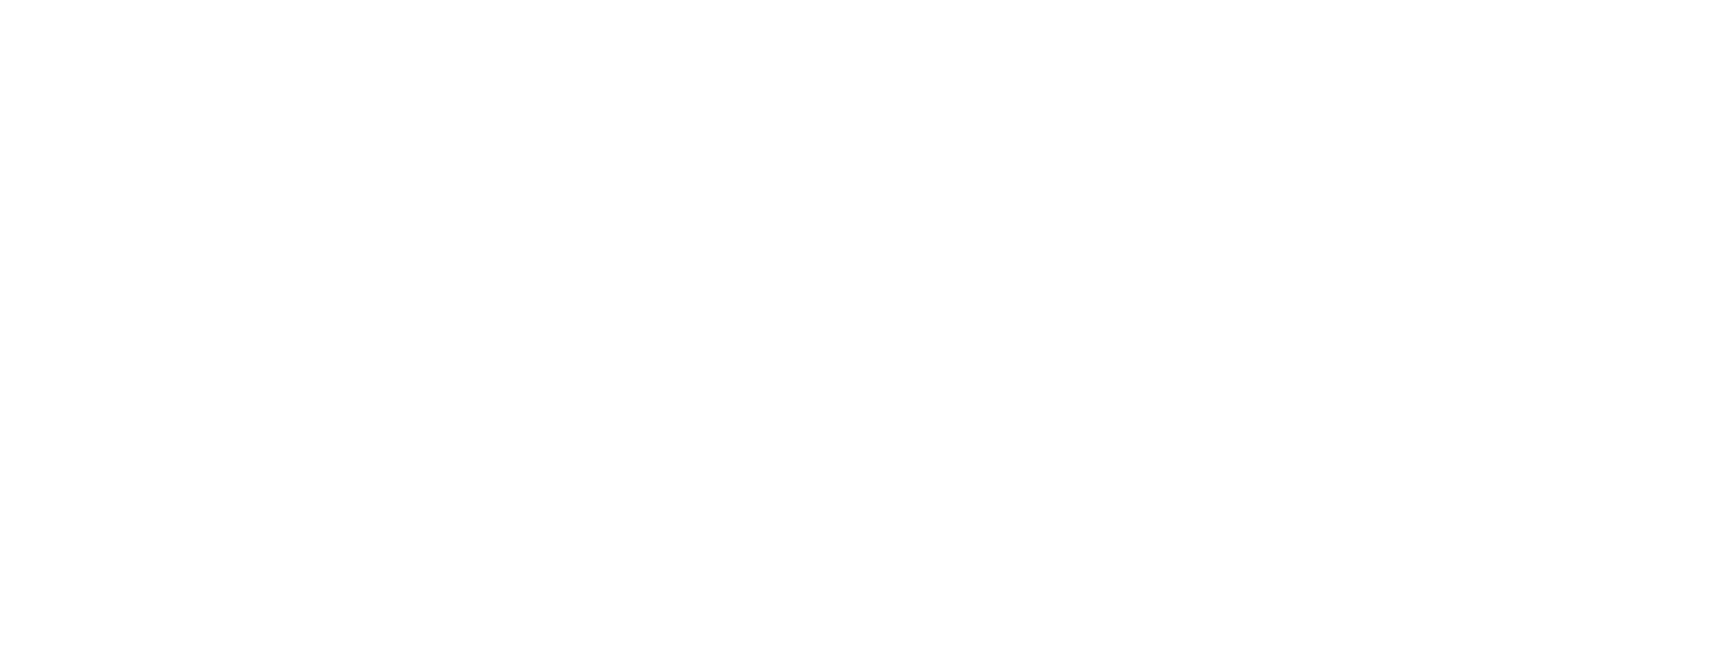 Cancer Prevention & Research Institute of Texas